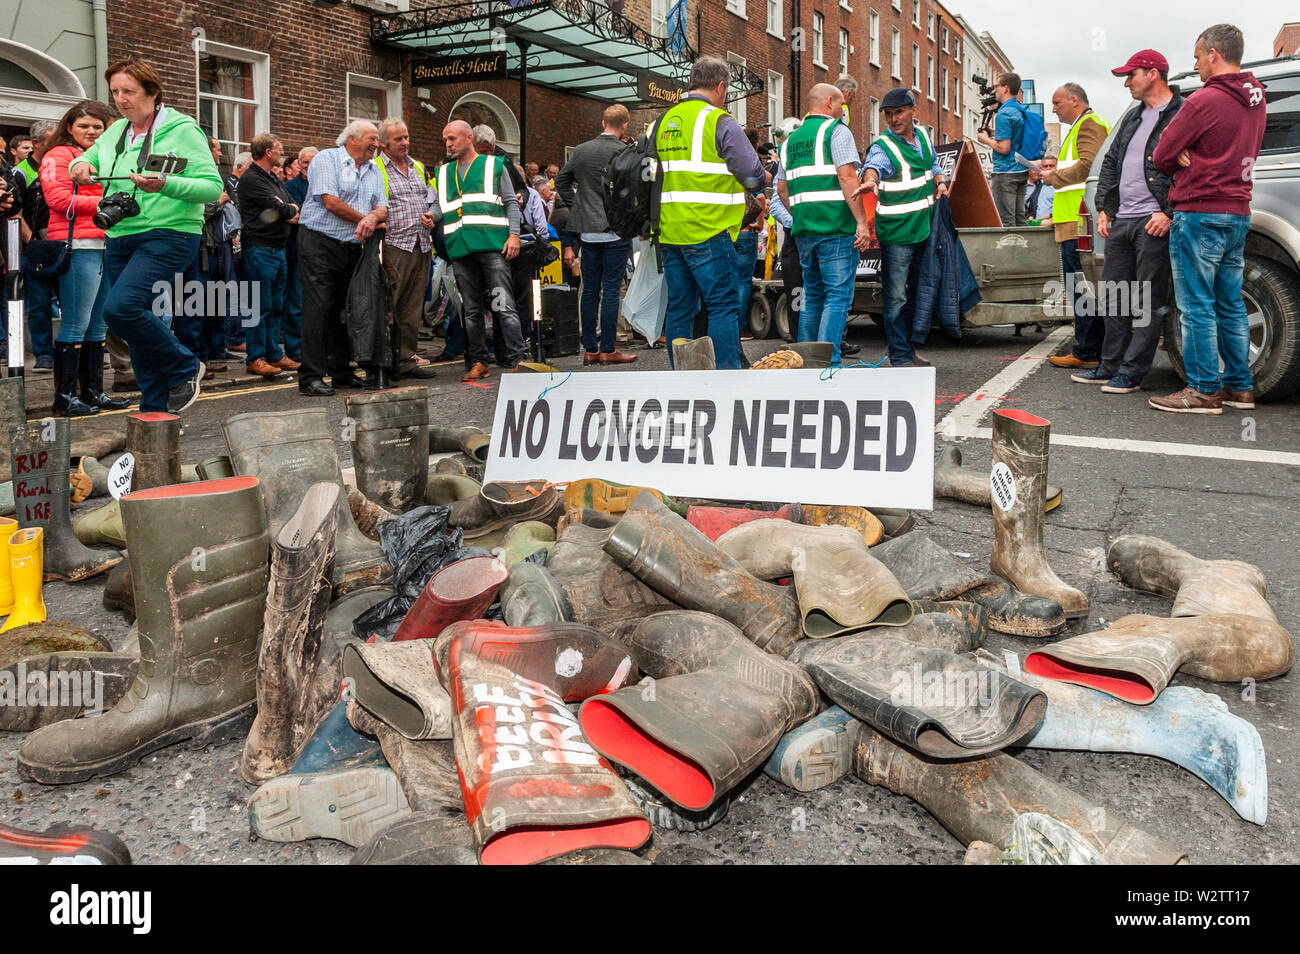 Dublin, Ireland. 10th July, 2019. Thousands of farmers descended on Leinster House today in protest at the Mercosur Deal which farmers claim will be the final nail in the coffin for their way of life. Farmers dumped their wellies outside the Dail claiming they're 'no longer needed'. Credit: Andy Gibson/Alamy Live News. Stock Photo